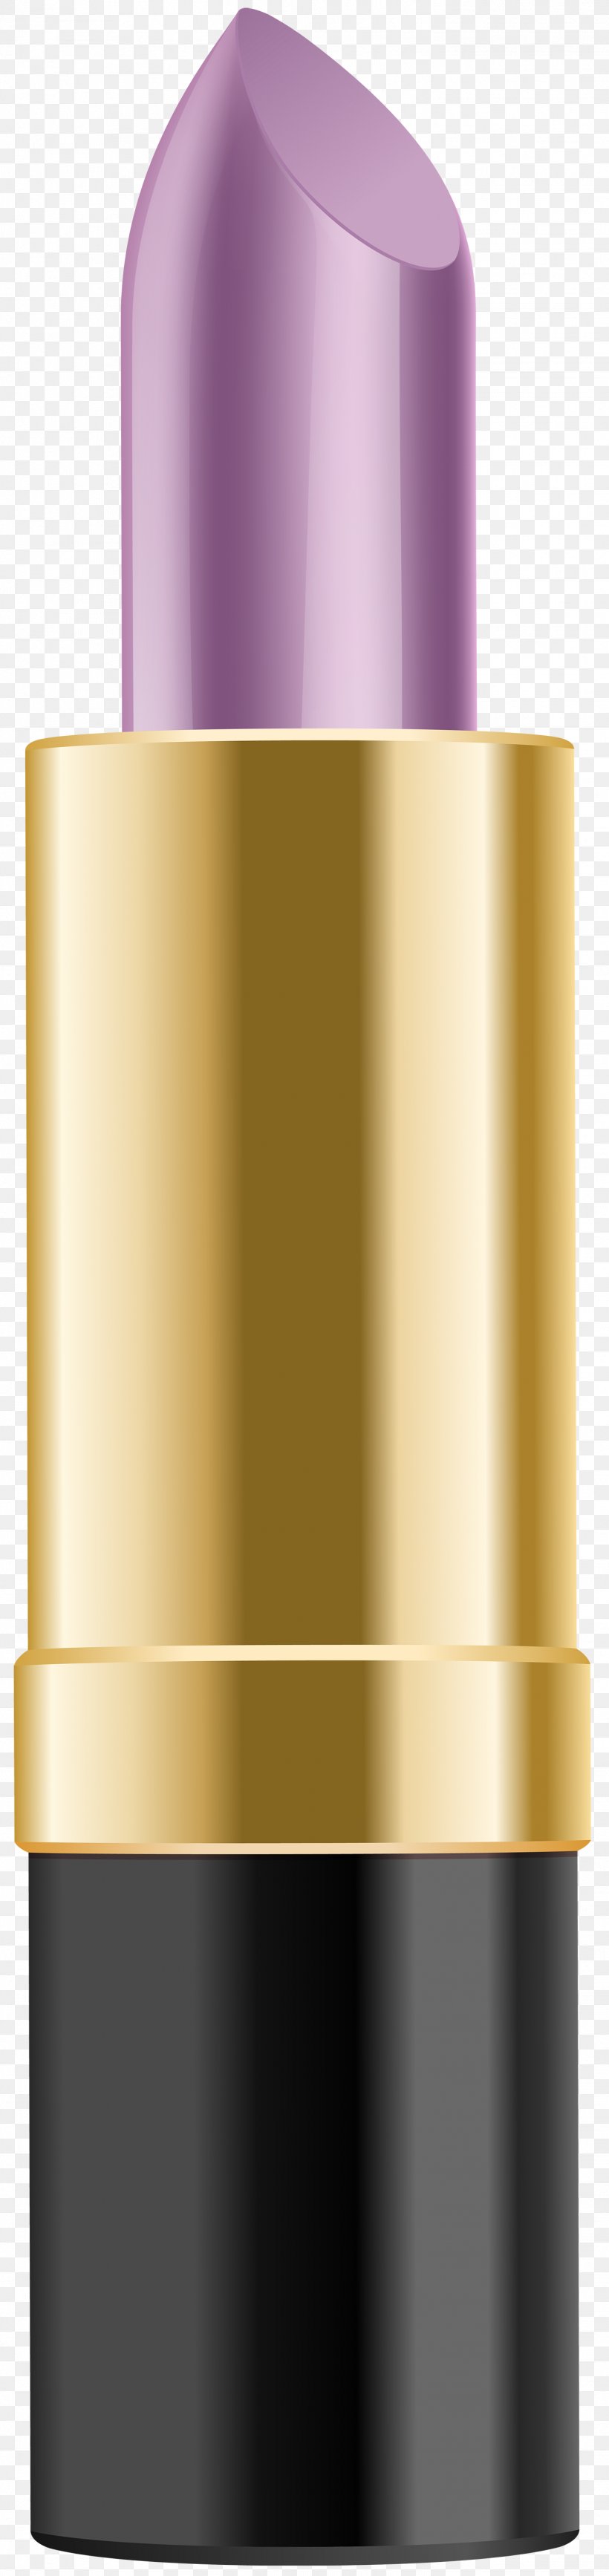 Lipstick 0 Clip Art, PNG, 1418x6000px, Lipstick, Cosmetics, Cylinder, Digital Image, Health Beauty Download Free